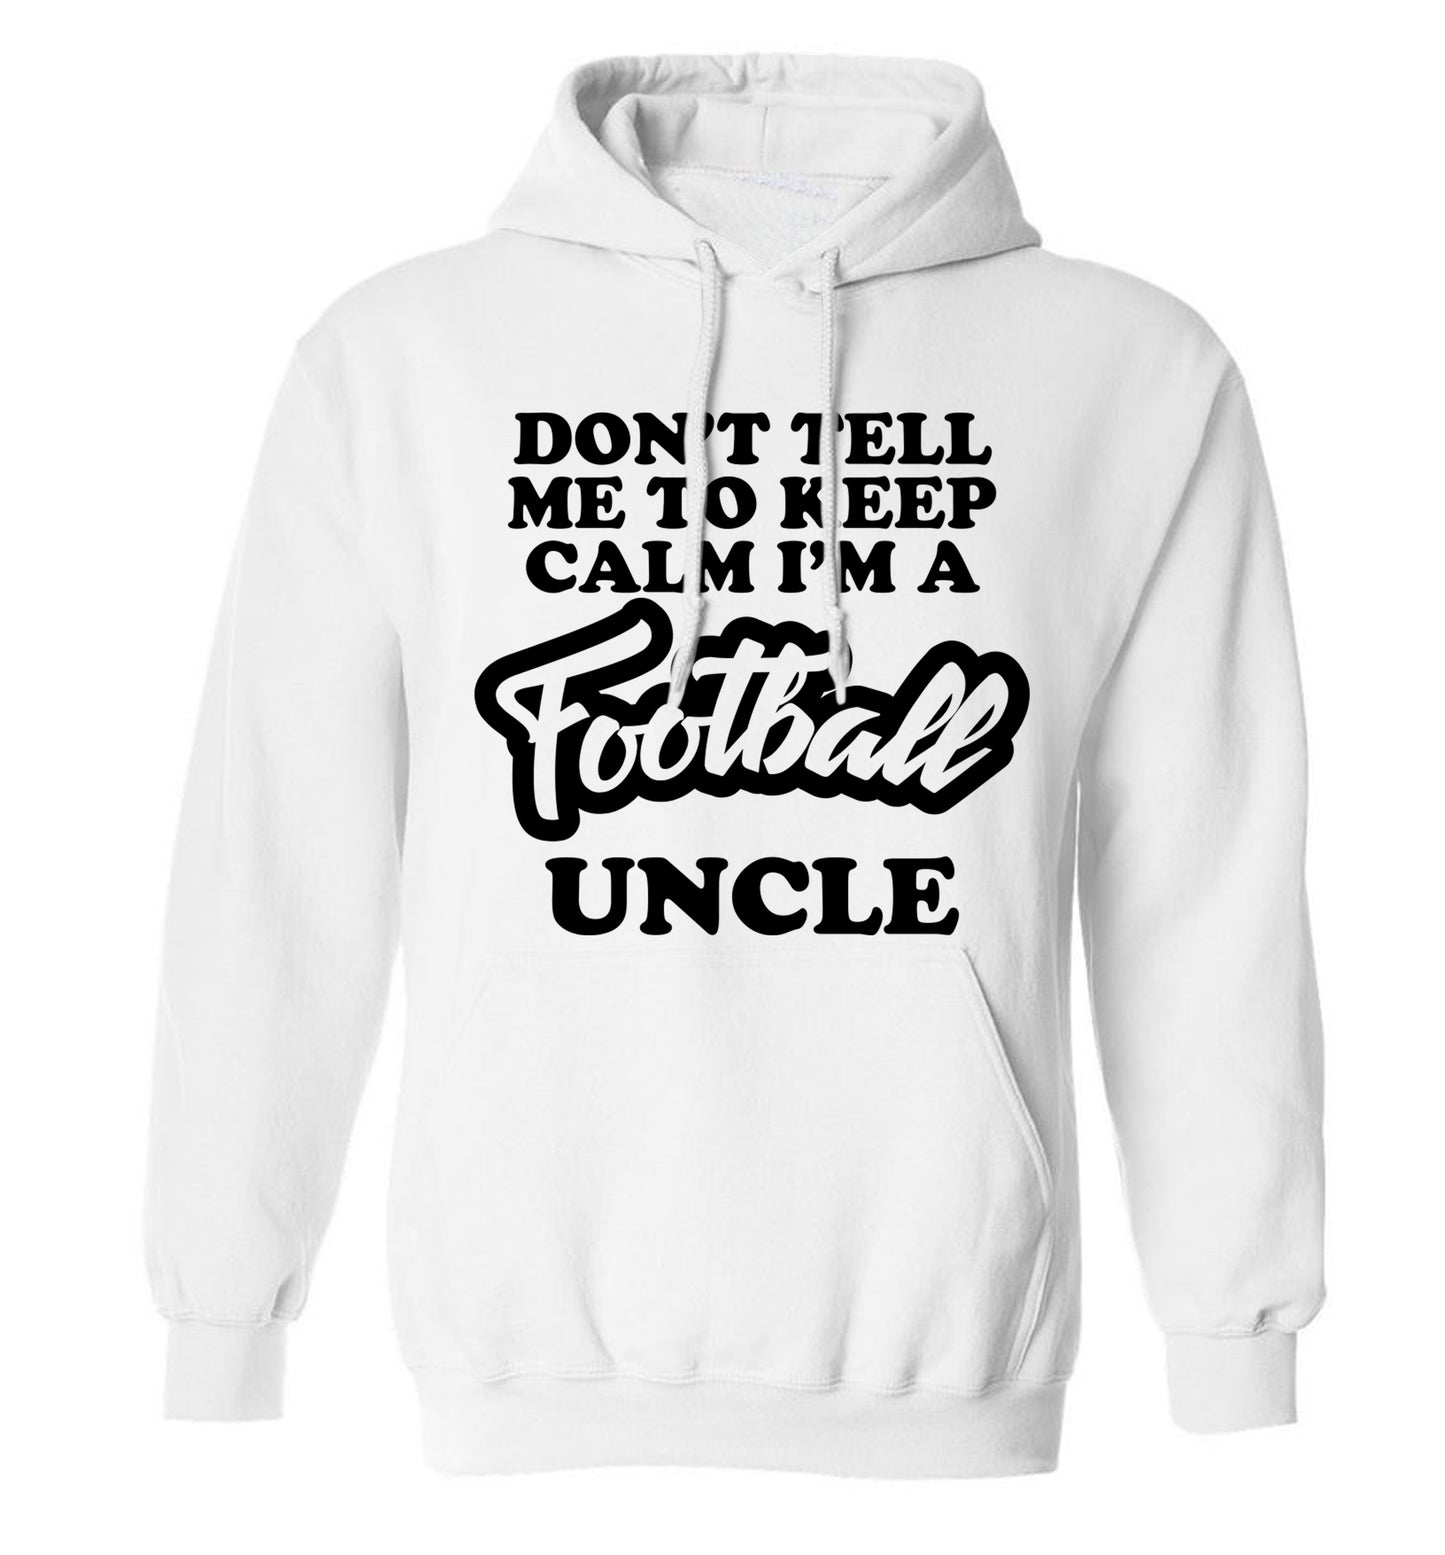 Don't tell me to keep calm I'm a football uncle adults unisexwhite hoodie 2XL